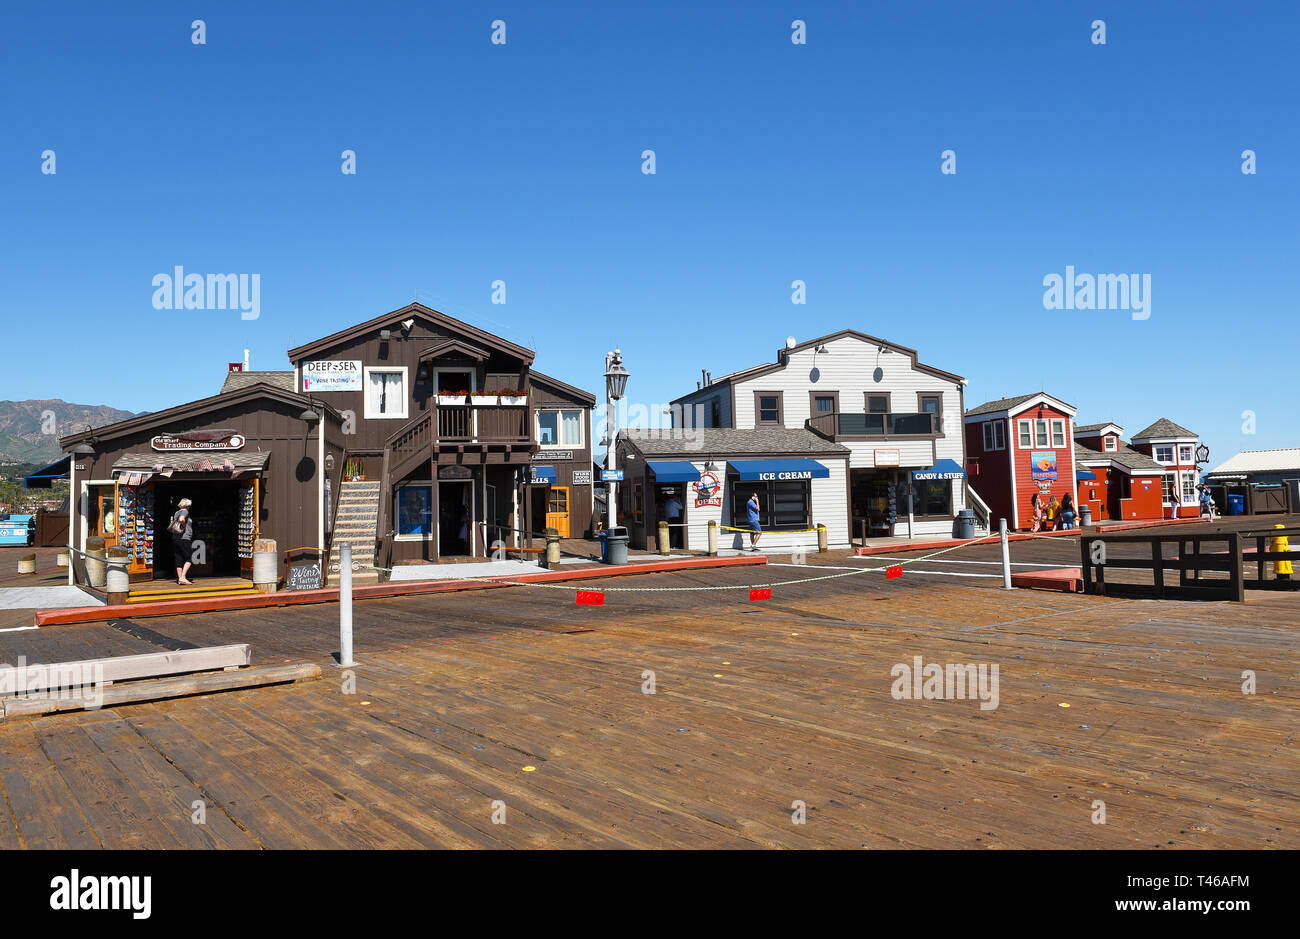 SANTA BARBARA, CALIFORNIA - APRIL 11, 2019: Shops on Stearns Wharf.  When completed In 1872, it became the longest deep-water pier between Los Angeles Stock Photo